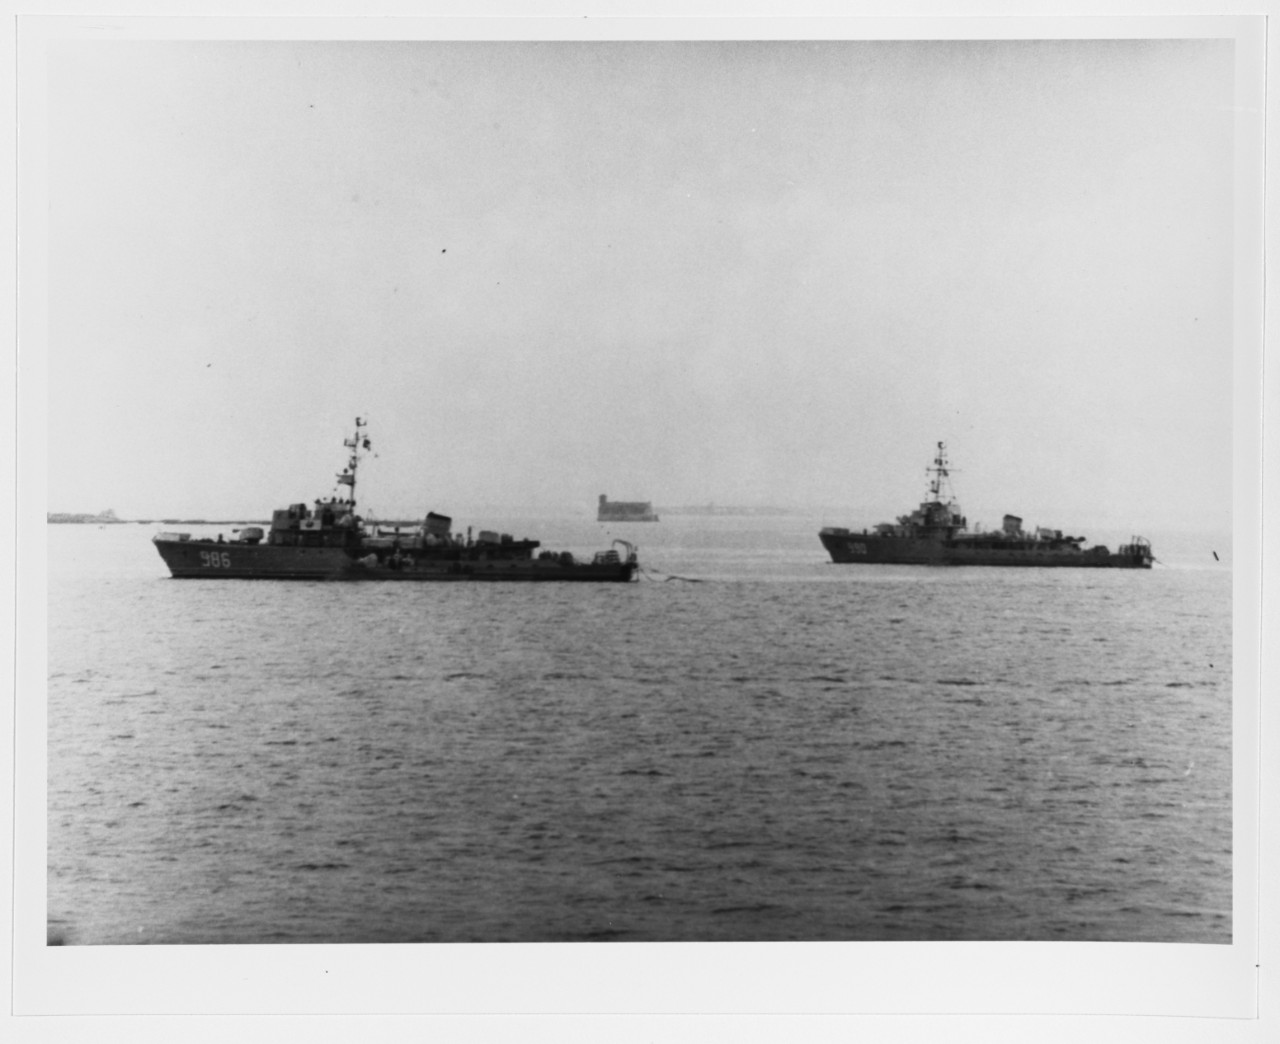 Soviet T-43 Class Minesweepers in the Eastern Baltic, 1956